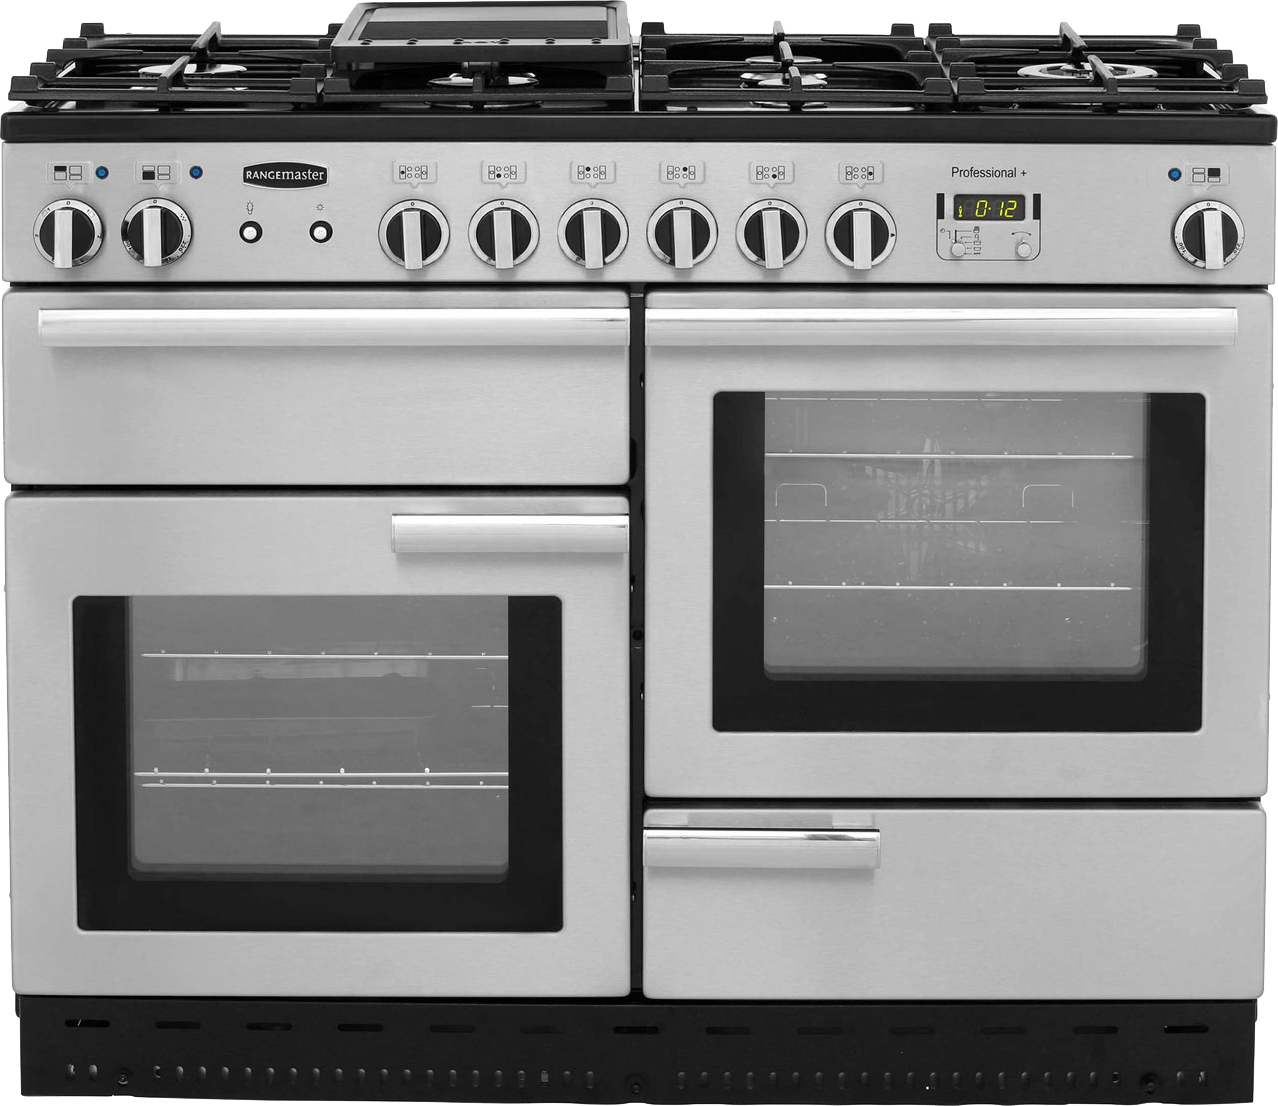 Rangemaster Professional Plus PROP110DFFSS/C 110cm Dual Fuel Range Cooker - Stainless Steel - A/A Rated, Stainless Steel